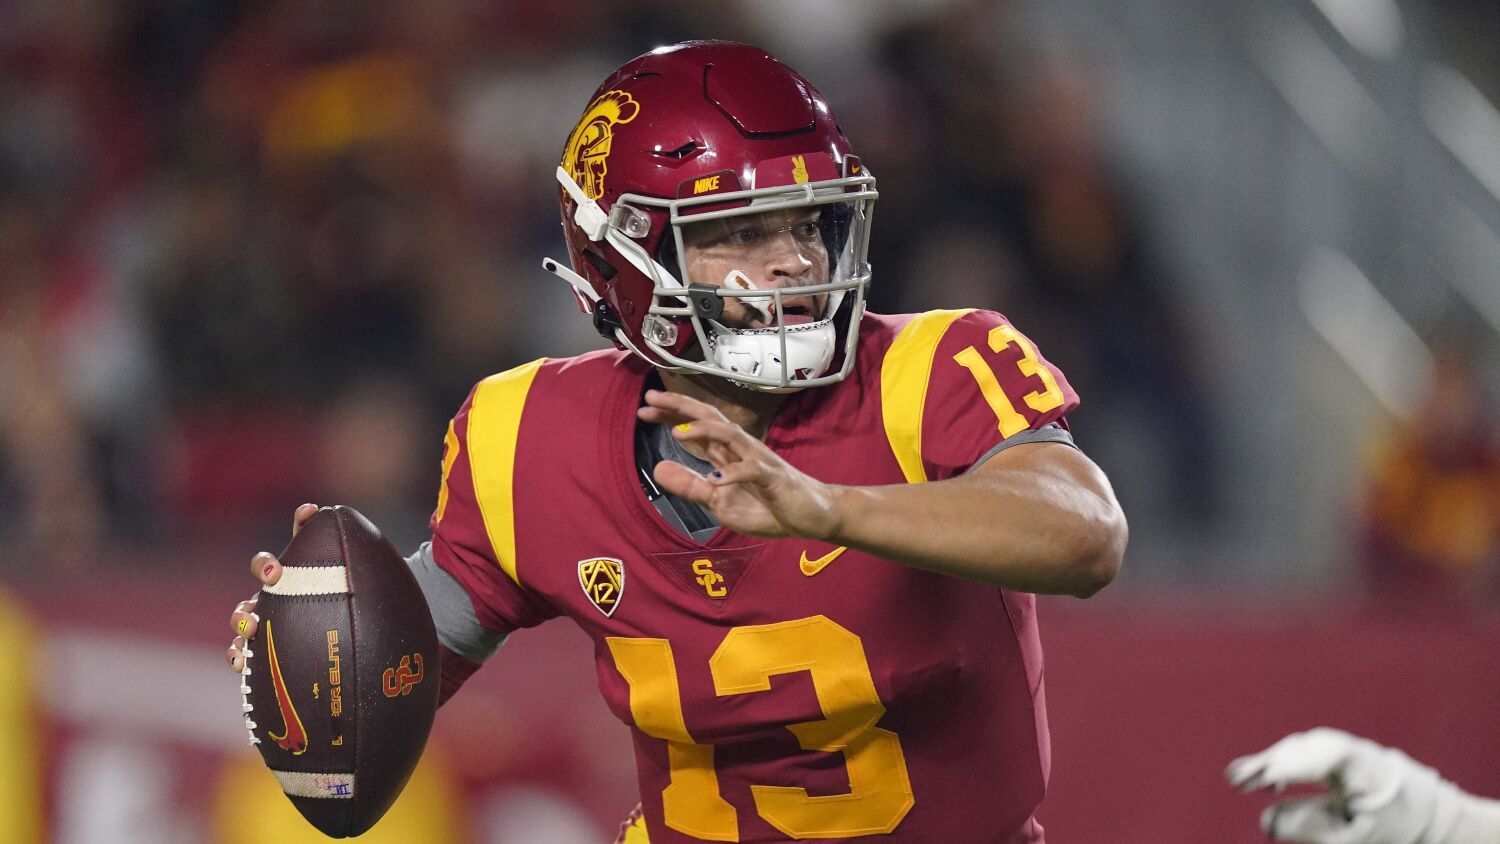 USC to face Tulane in the Cotton Bowl Classic